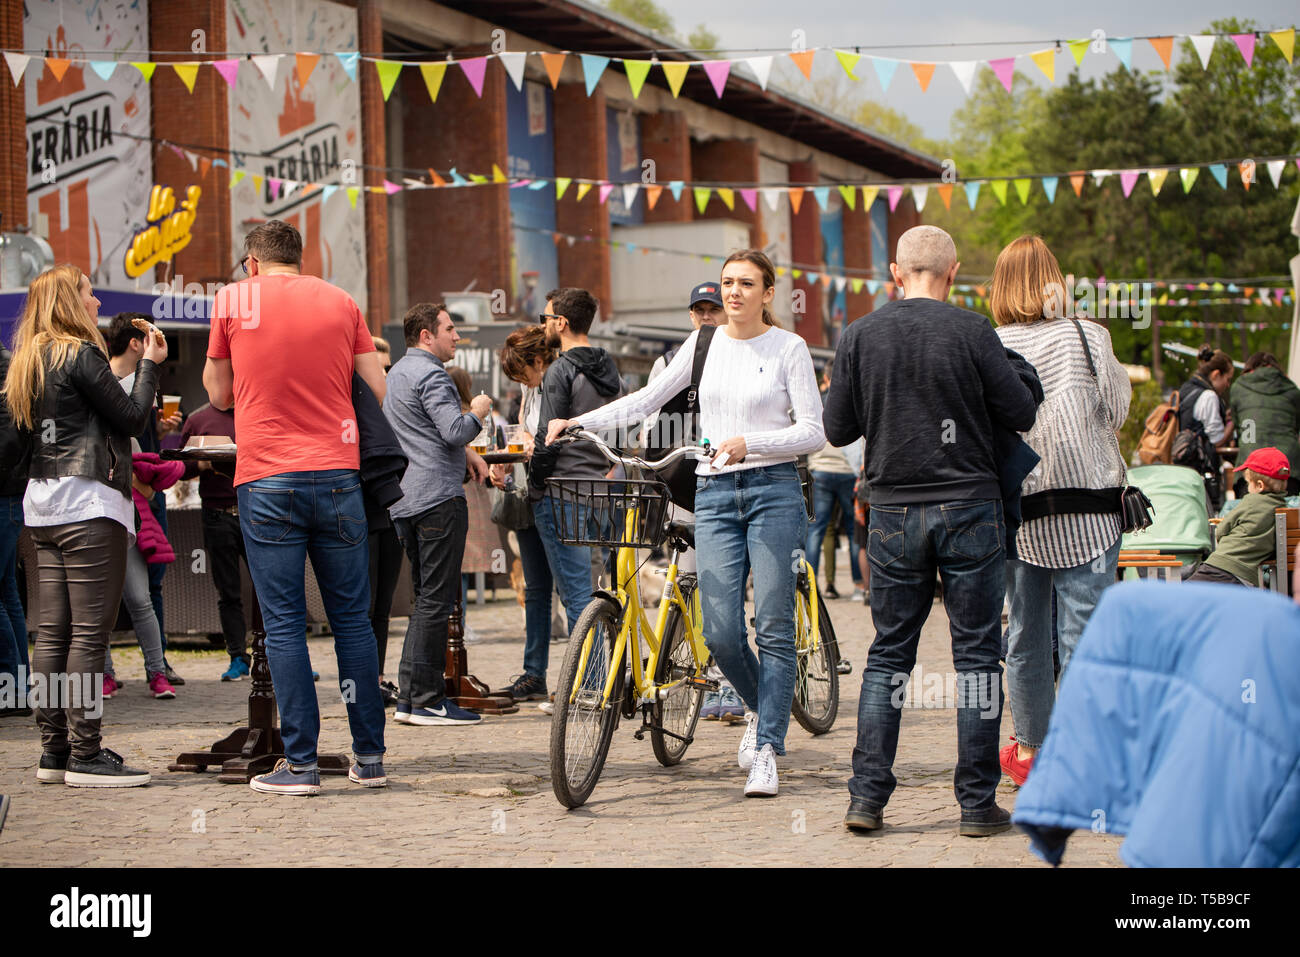 Bucharest, Romania: 21.04.2019 - Street Food Truck festival - Girl carrrying a bike at a street food truck festival in the park in the middle of a crowd. Adult and children fun weekend at the fair. Stock Photo